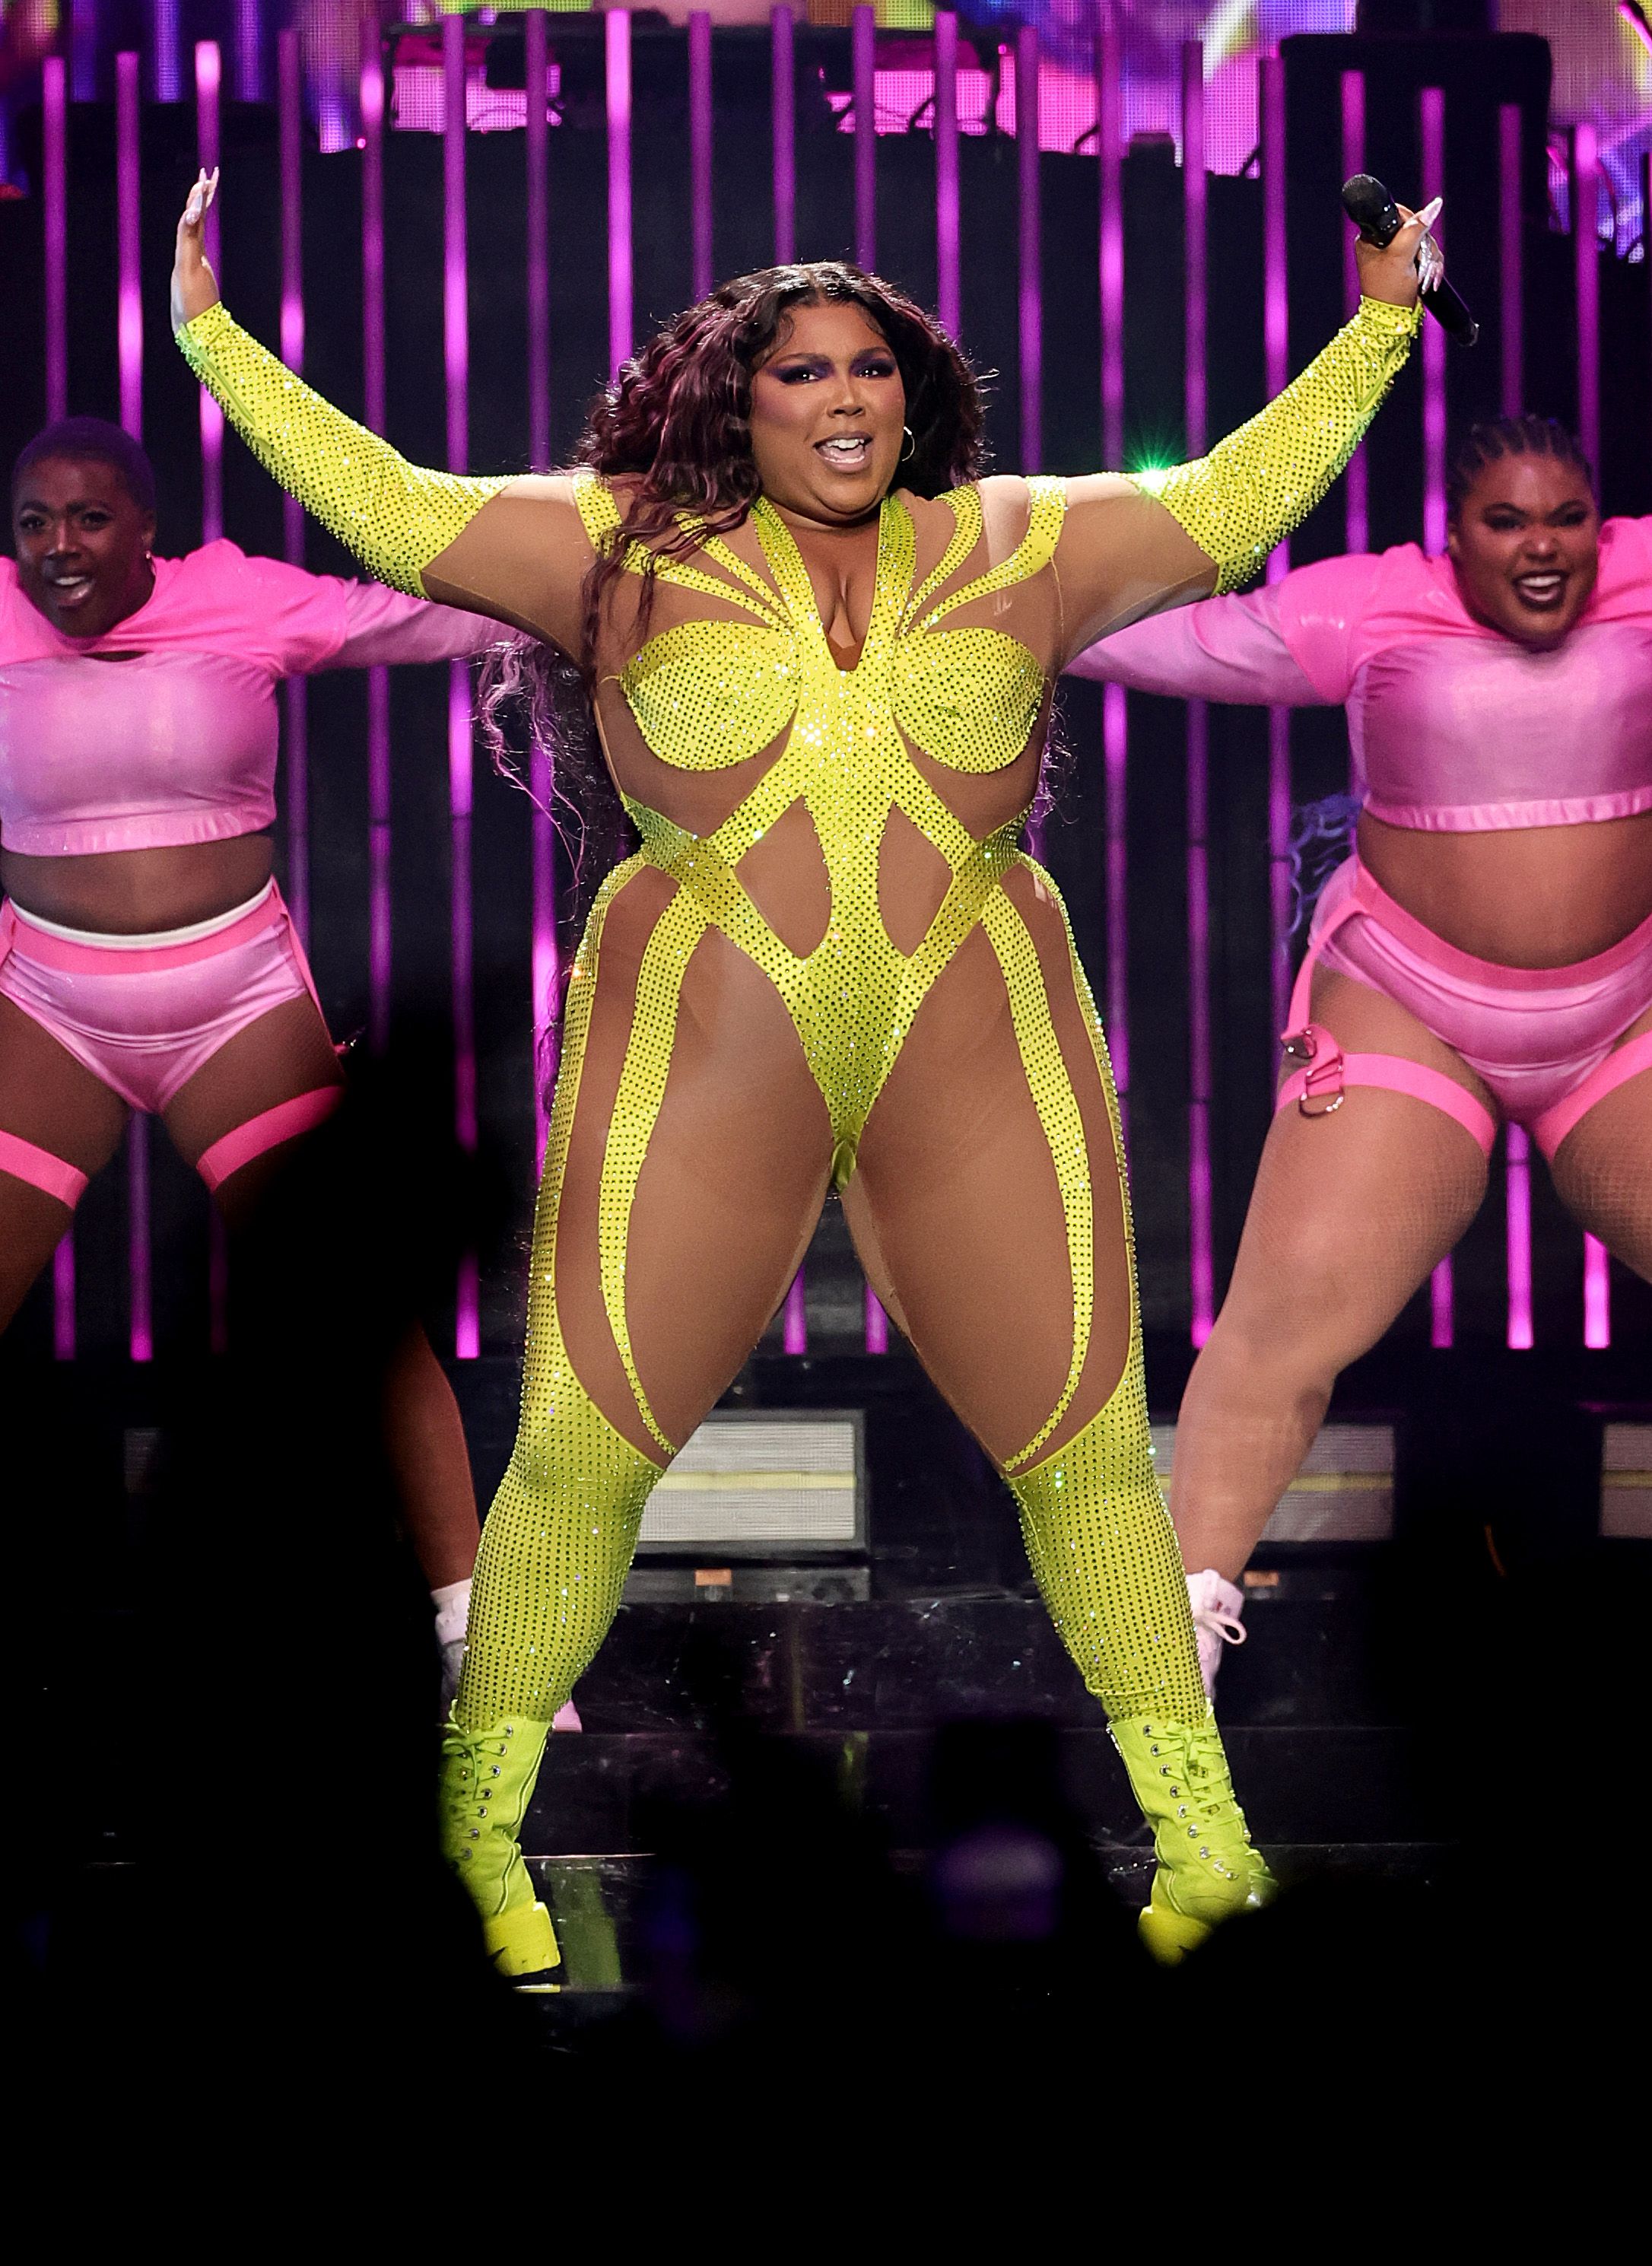 Lilac Shiny Bodysuit worn by Lizzo in Juice for her live